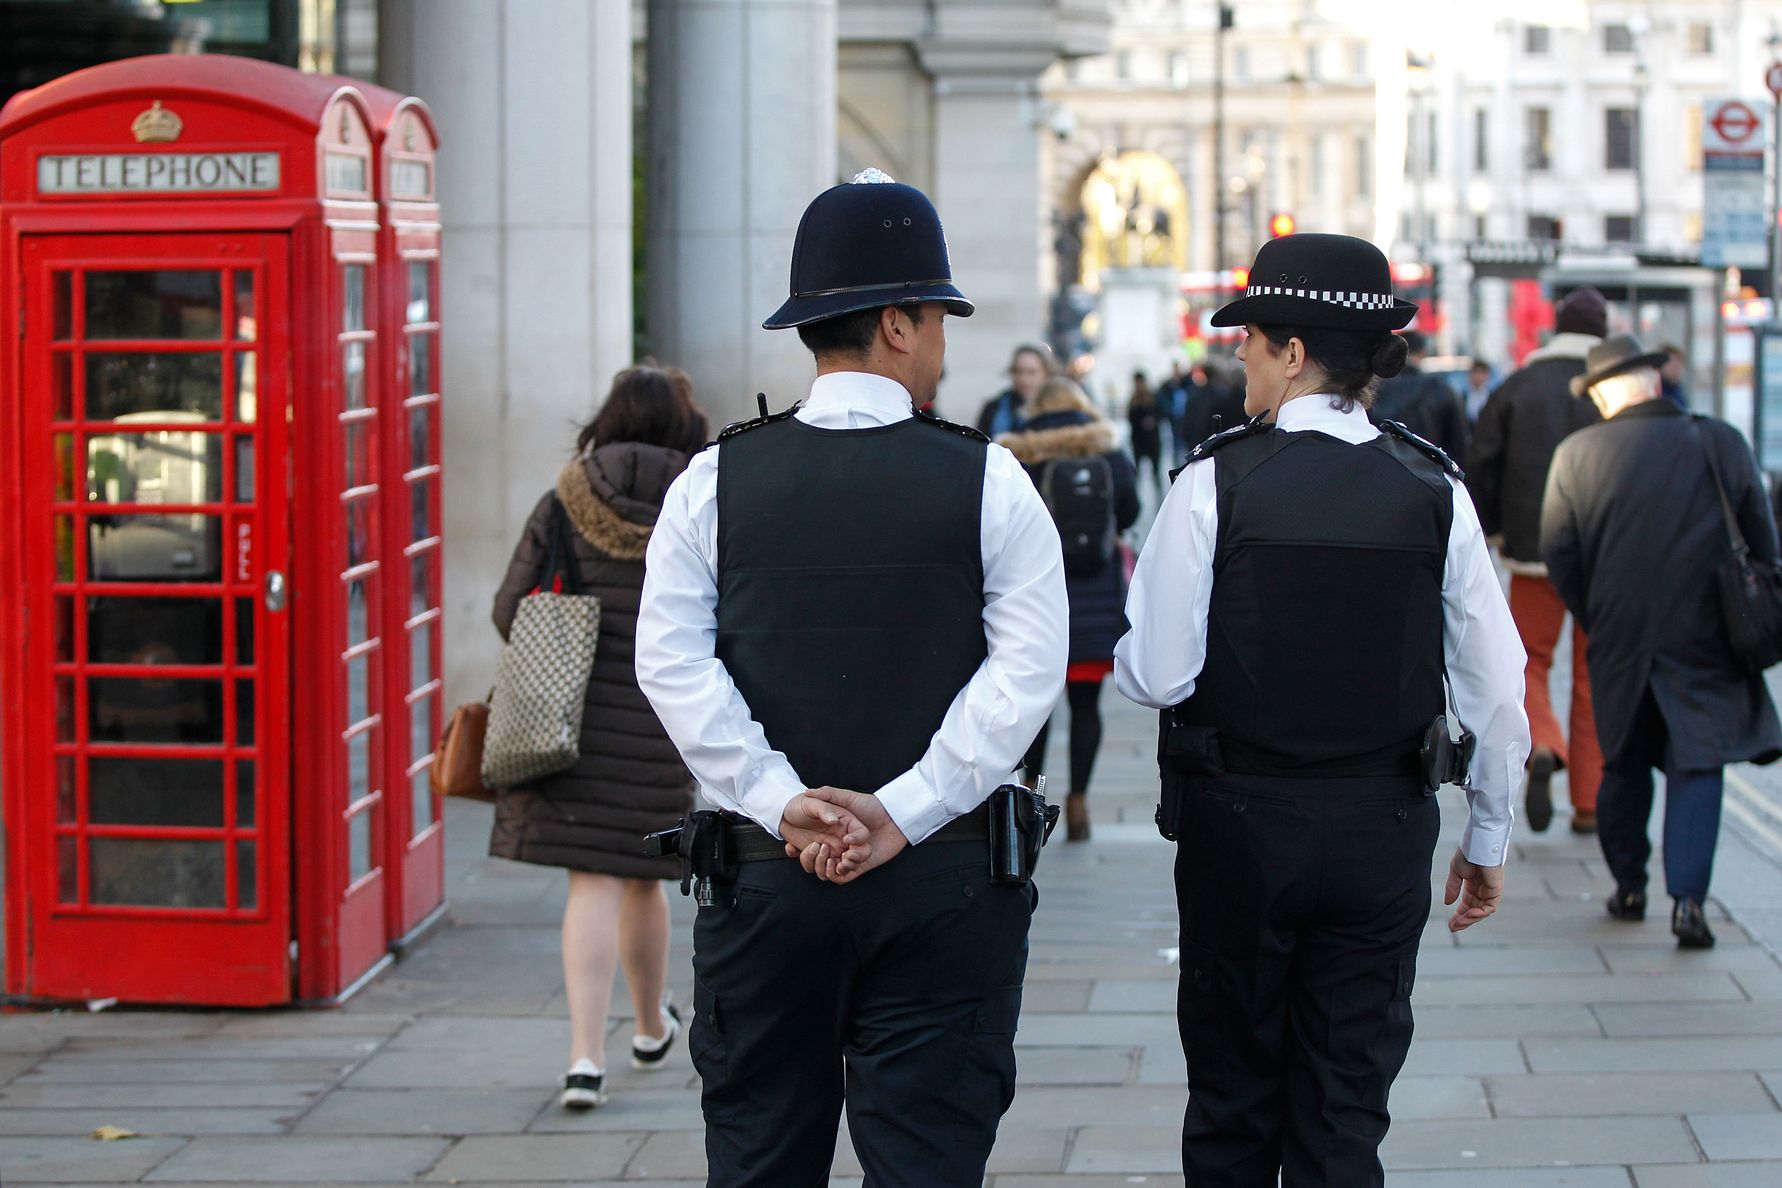 West End officers use innovative new tactics to protect women and girls  